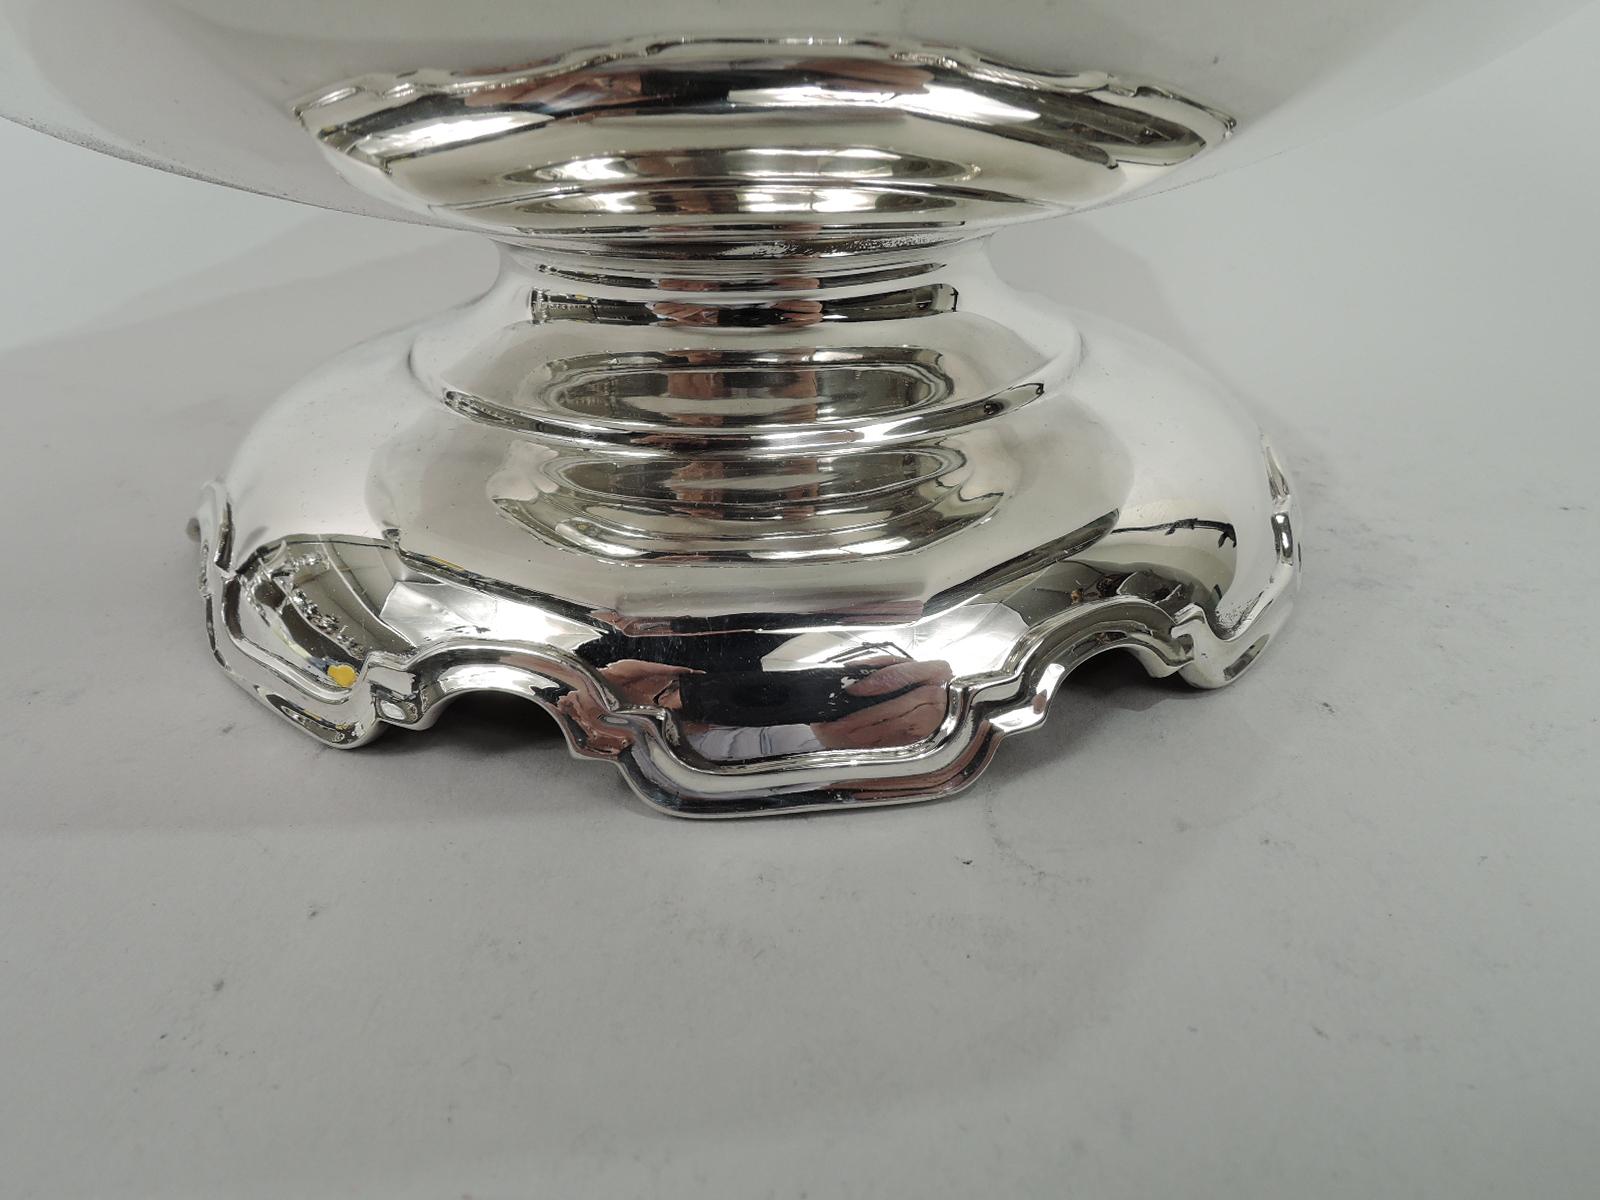 English Modern Georgian Monteith-Style Sterling Silver Bowl In Excellent Condition For Sale In New York, NY